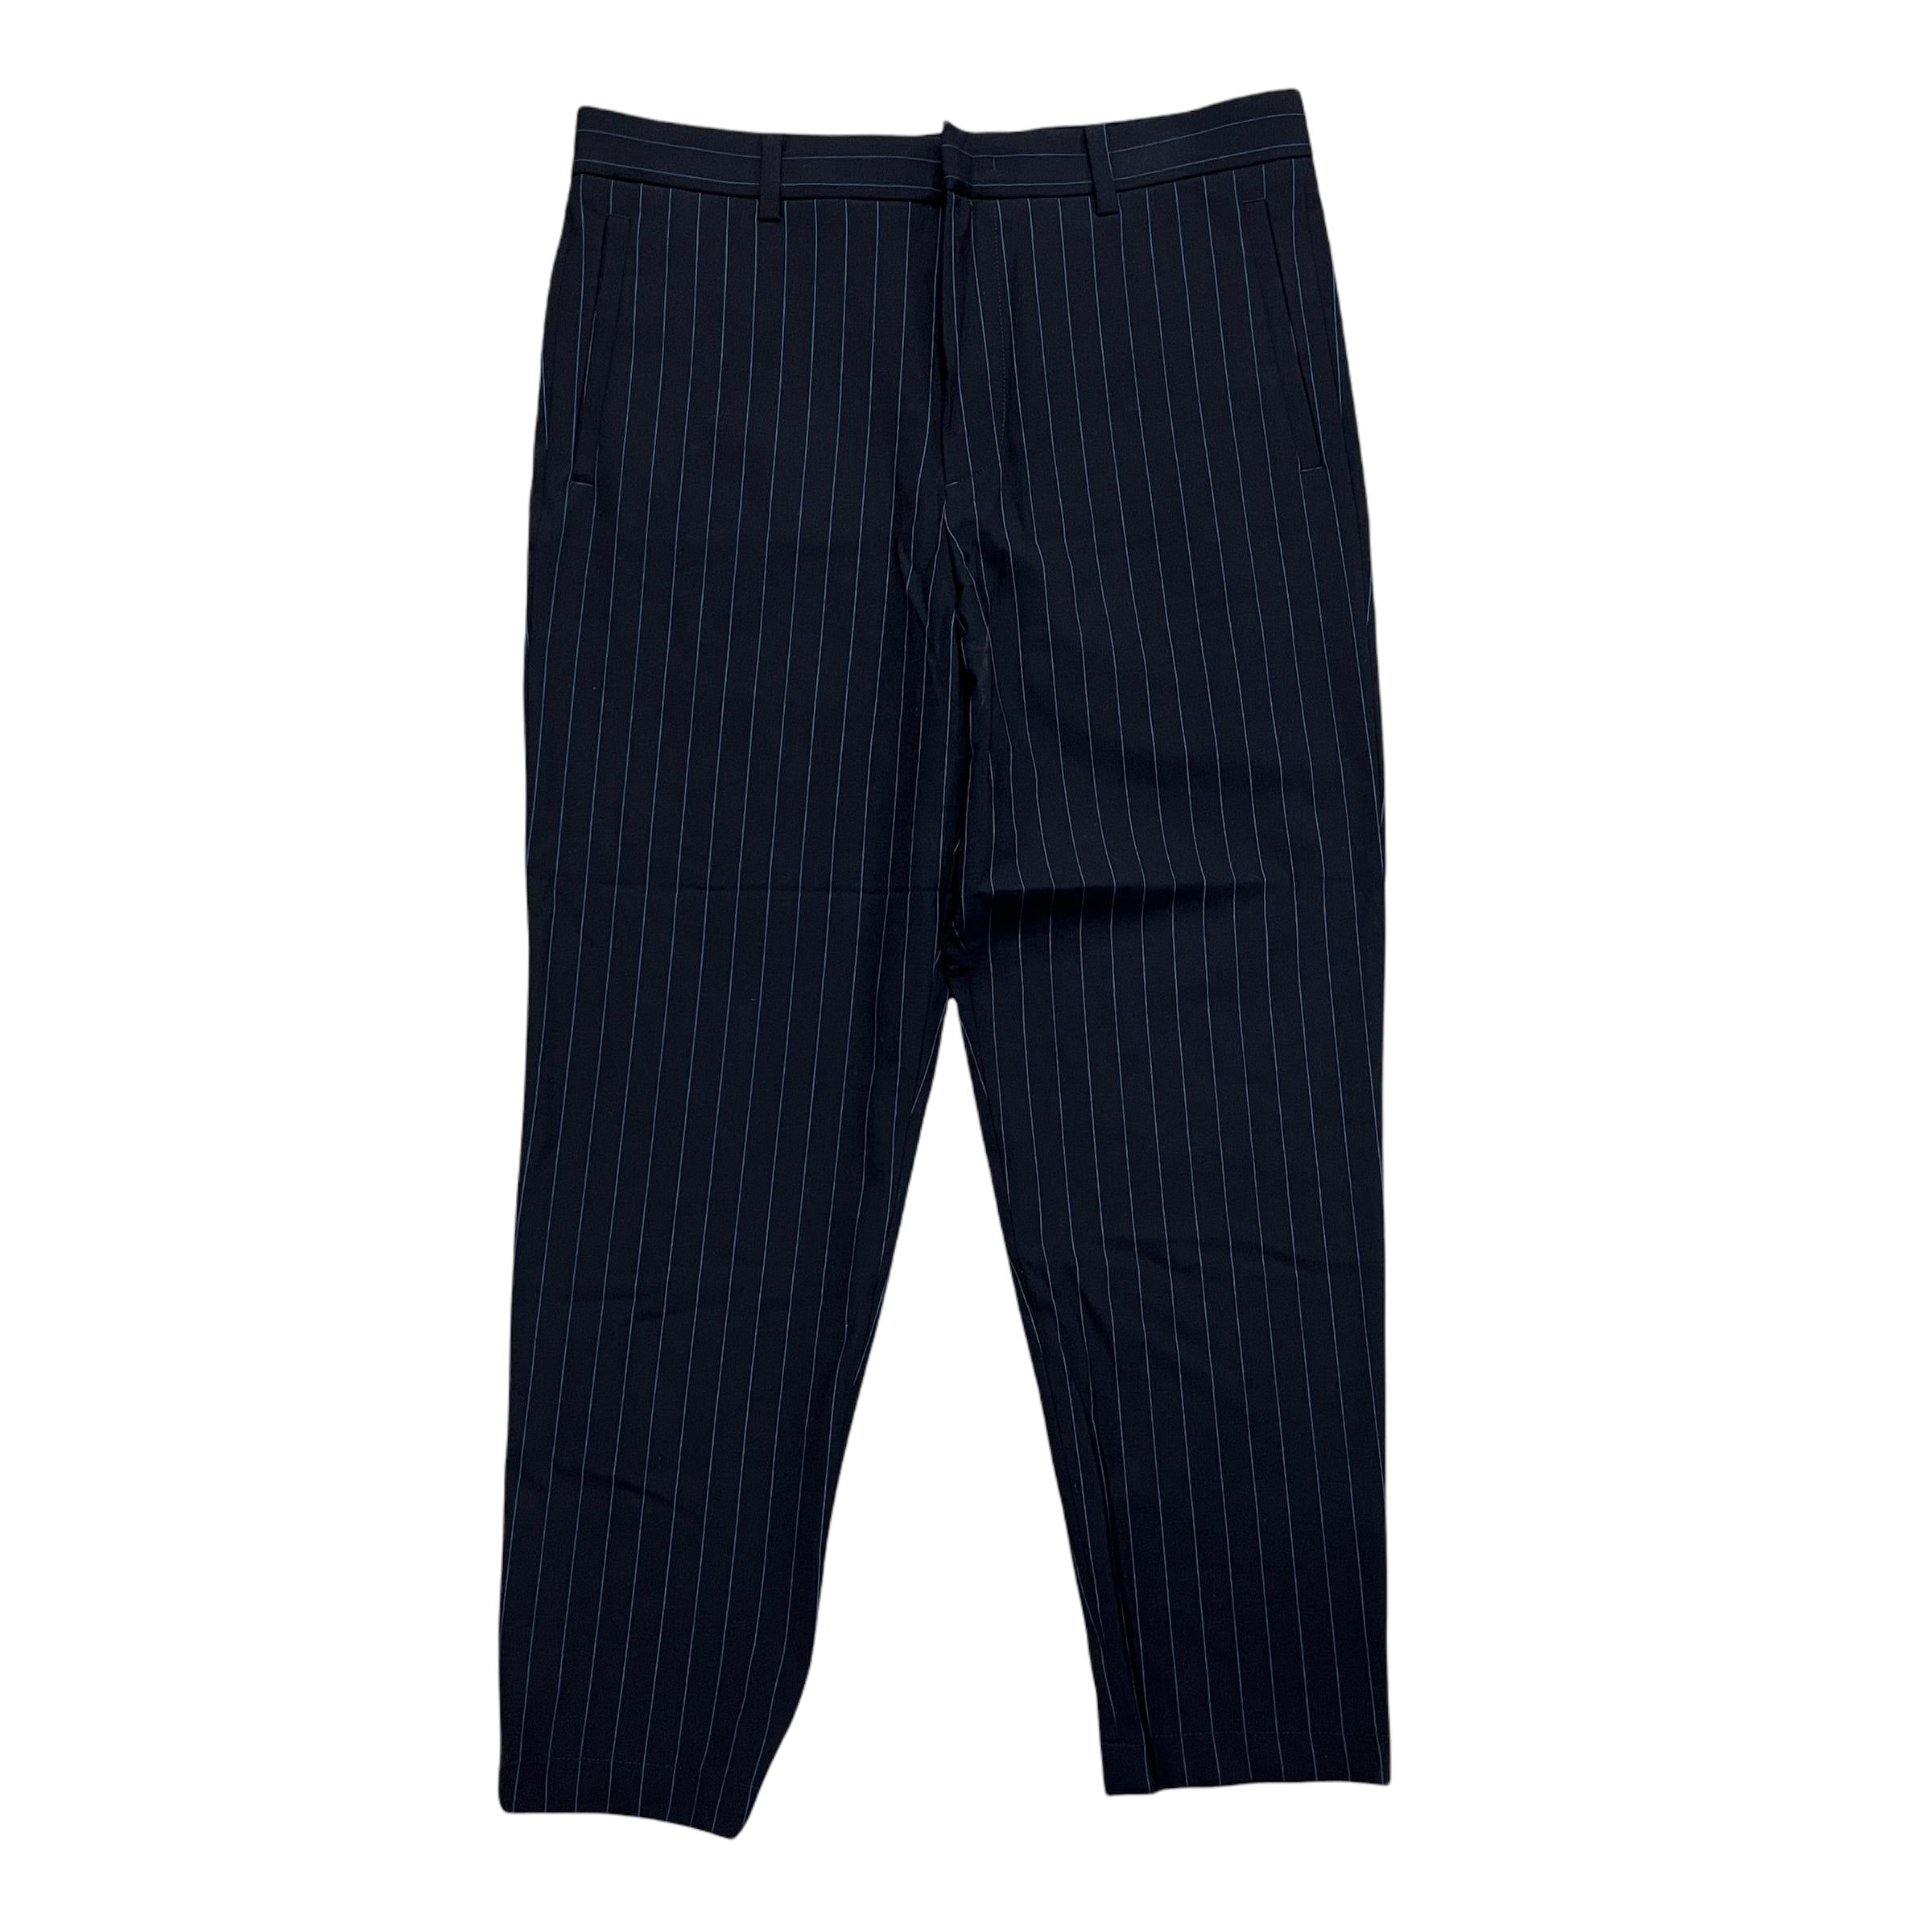 [System] Blue Stripe Trousers-Size 32